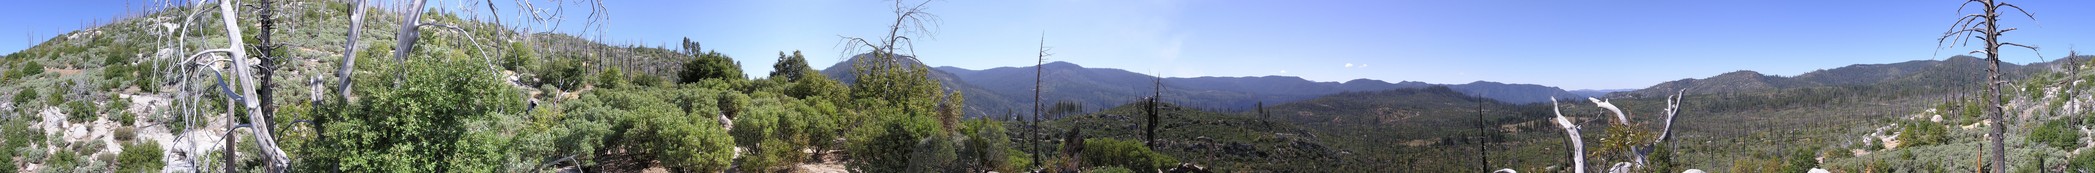 [Foresta, on the way to Hetch Hetchy]